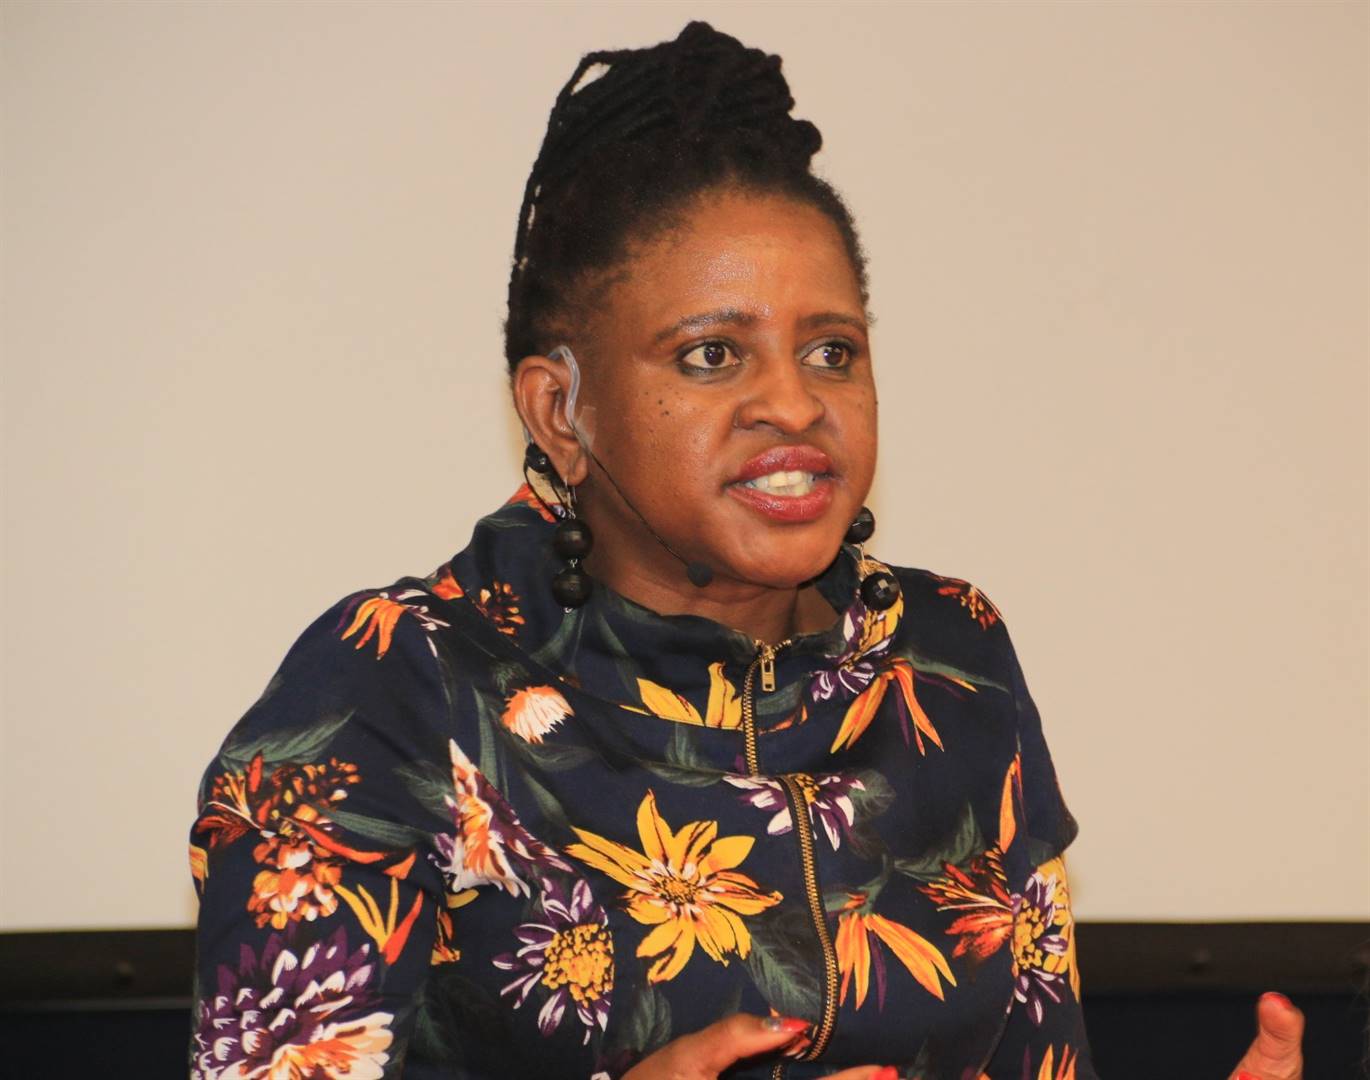 South African National Editors Forum chairperson Mahlatse Mahlase talks about the safety of South African journalists. She says threats on journalists are on the increase. Picture: Palesa Dlamini/City Press